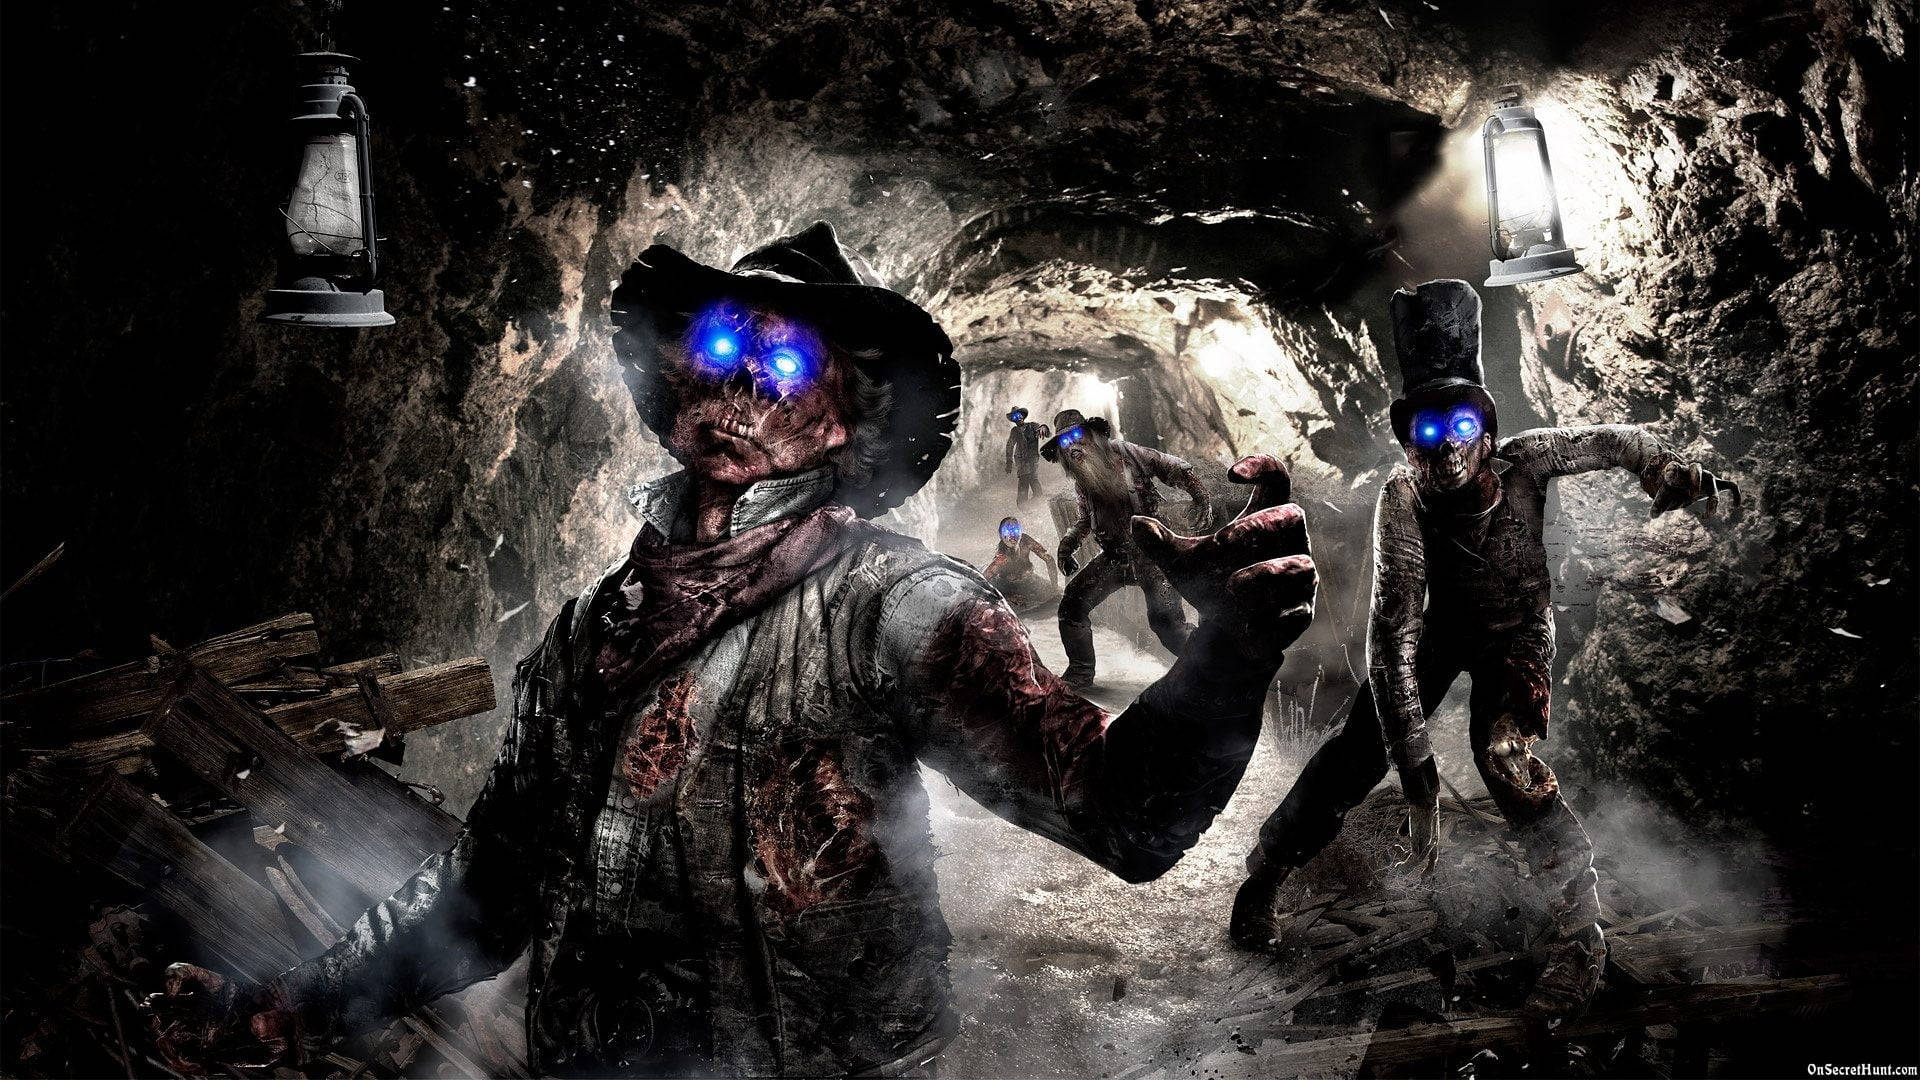 Zombies In A Cave With Blue Lights Wallpaper